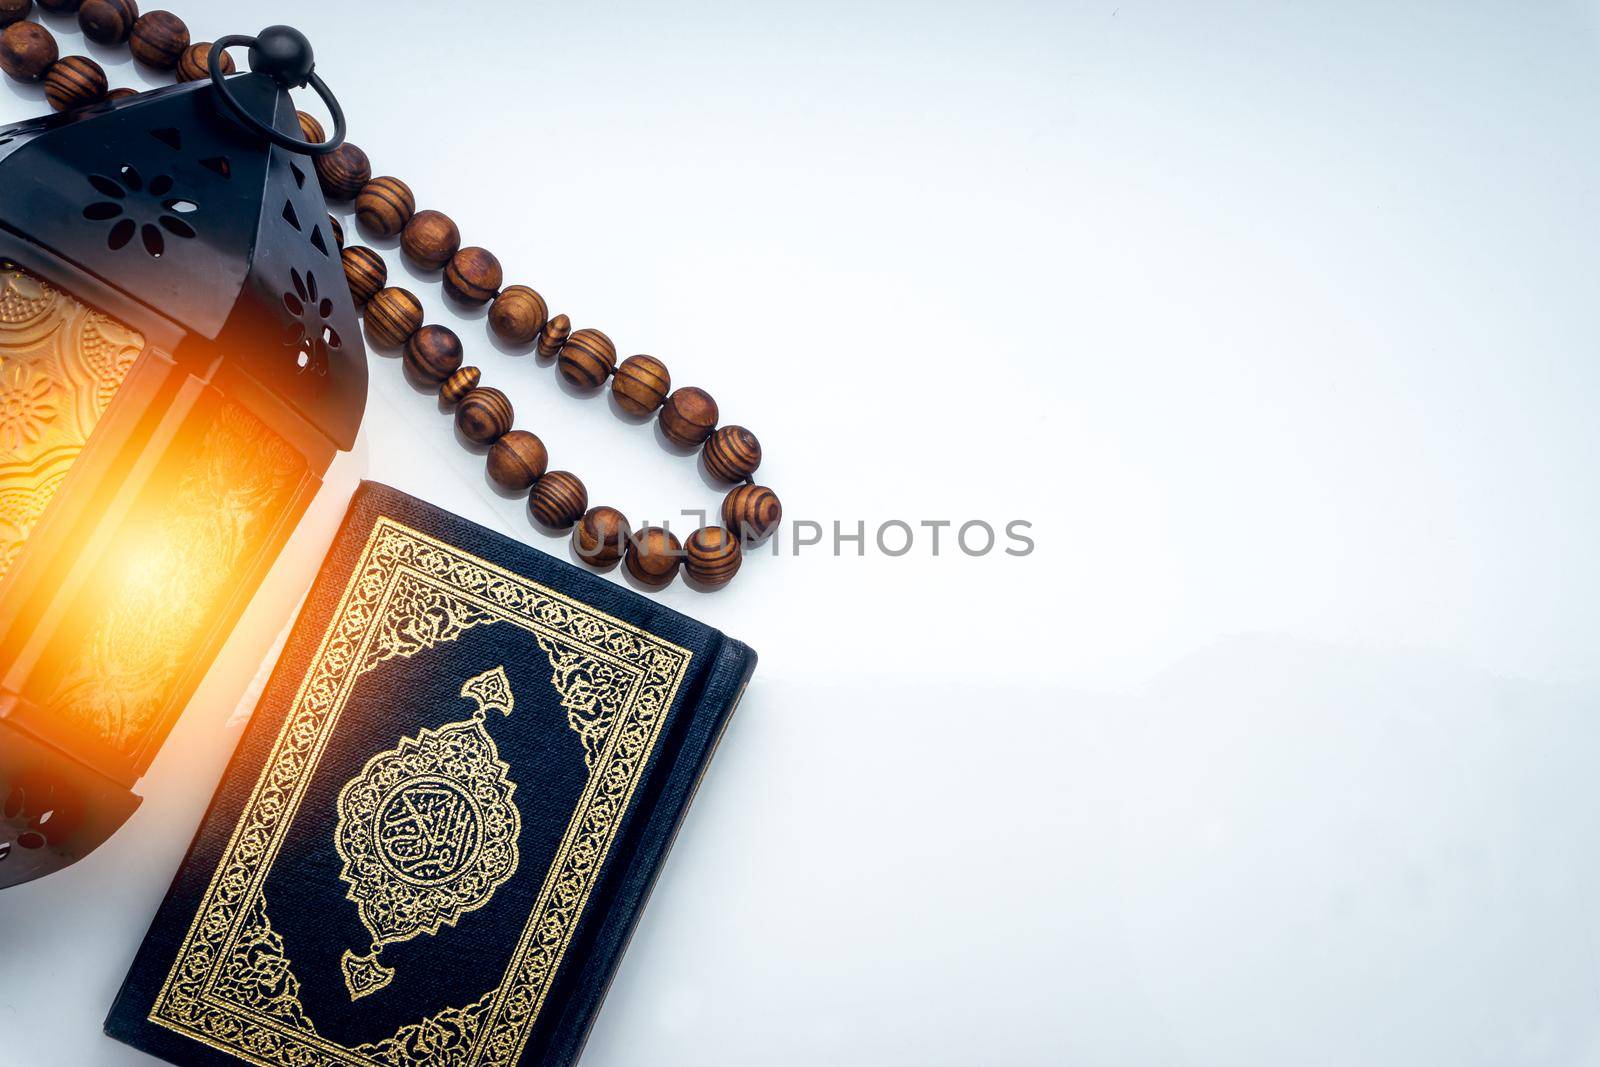 Holy Al Quran with written arabic calligraphy meaning of Al Quran, lantern and rosary beads or tasbih on white background. Copy space and crop fragment